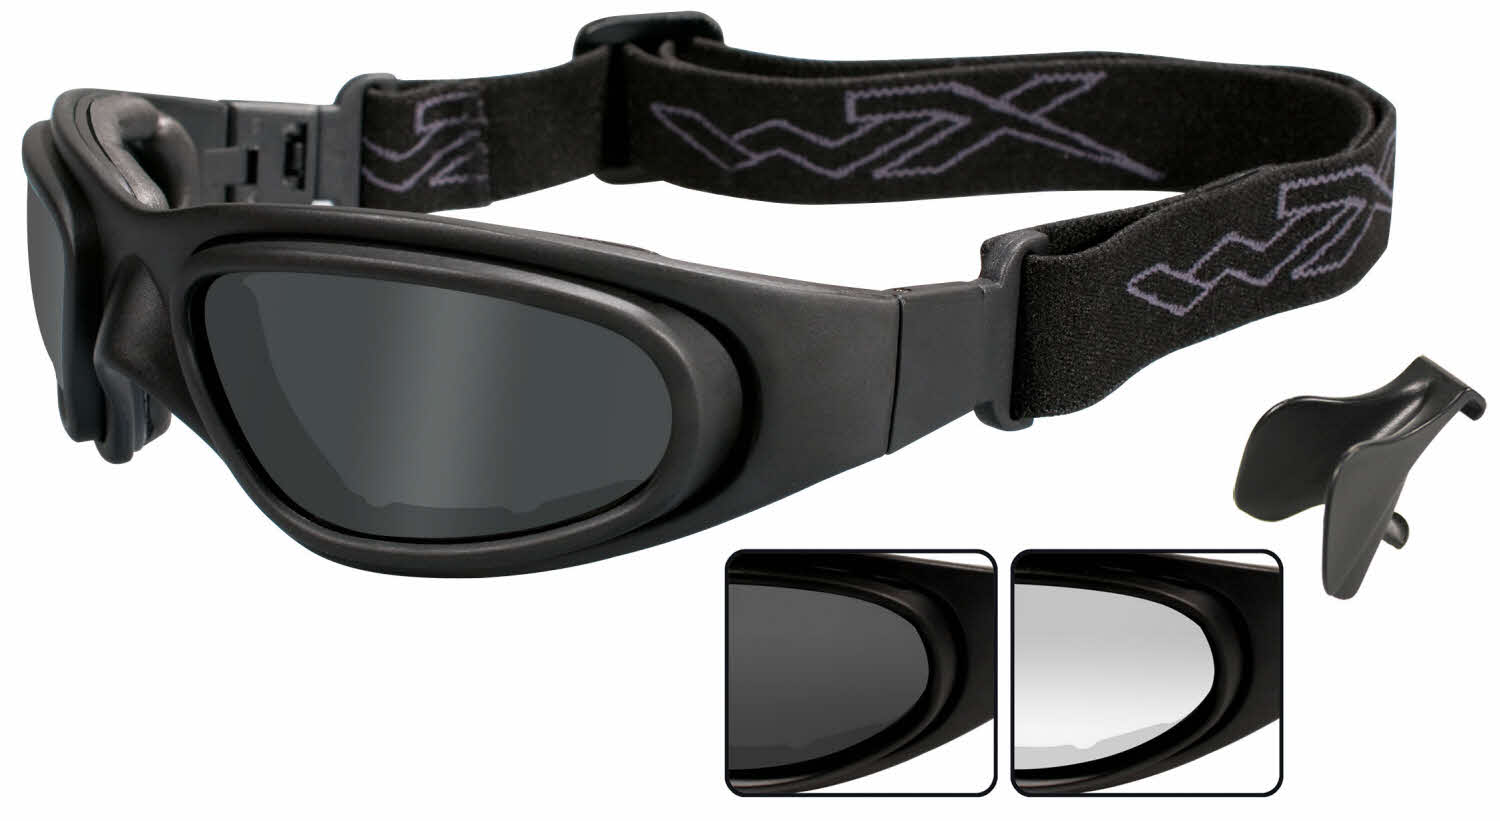 Wiley X Goggles SG-1